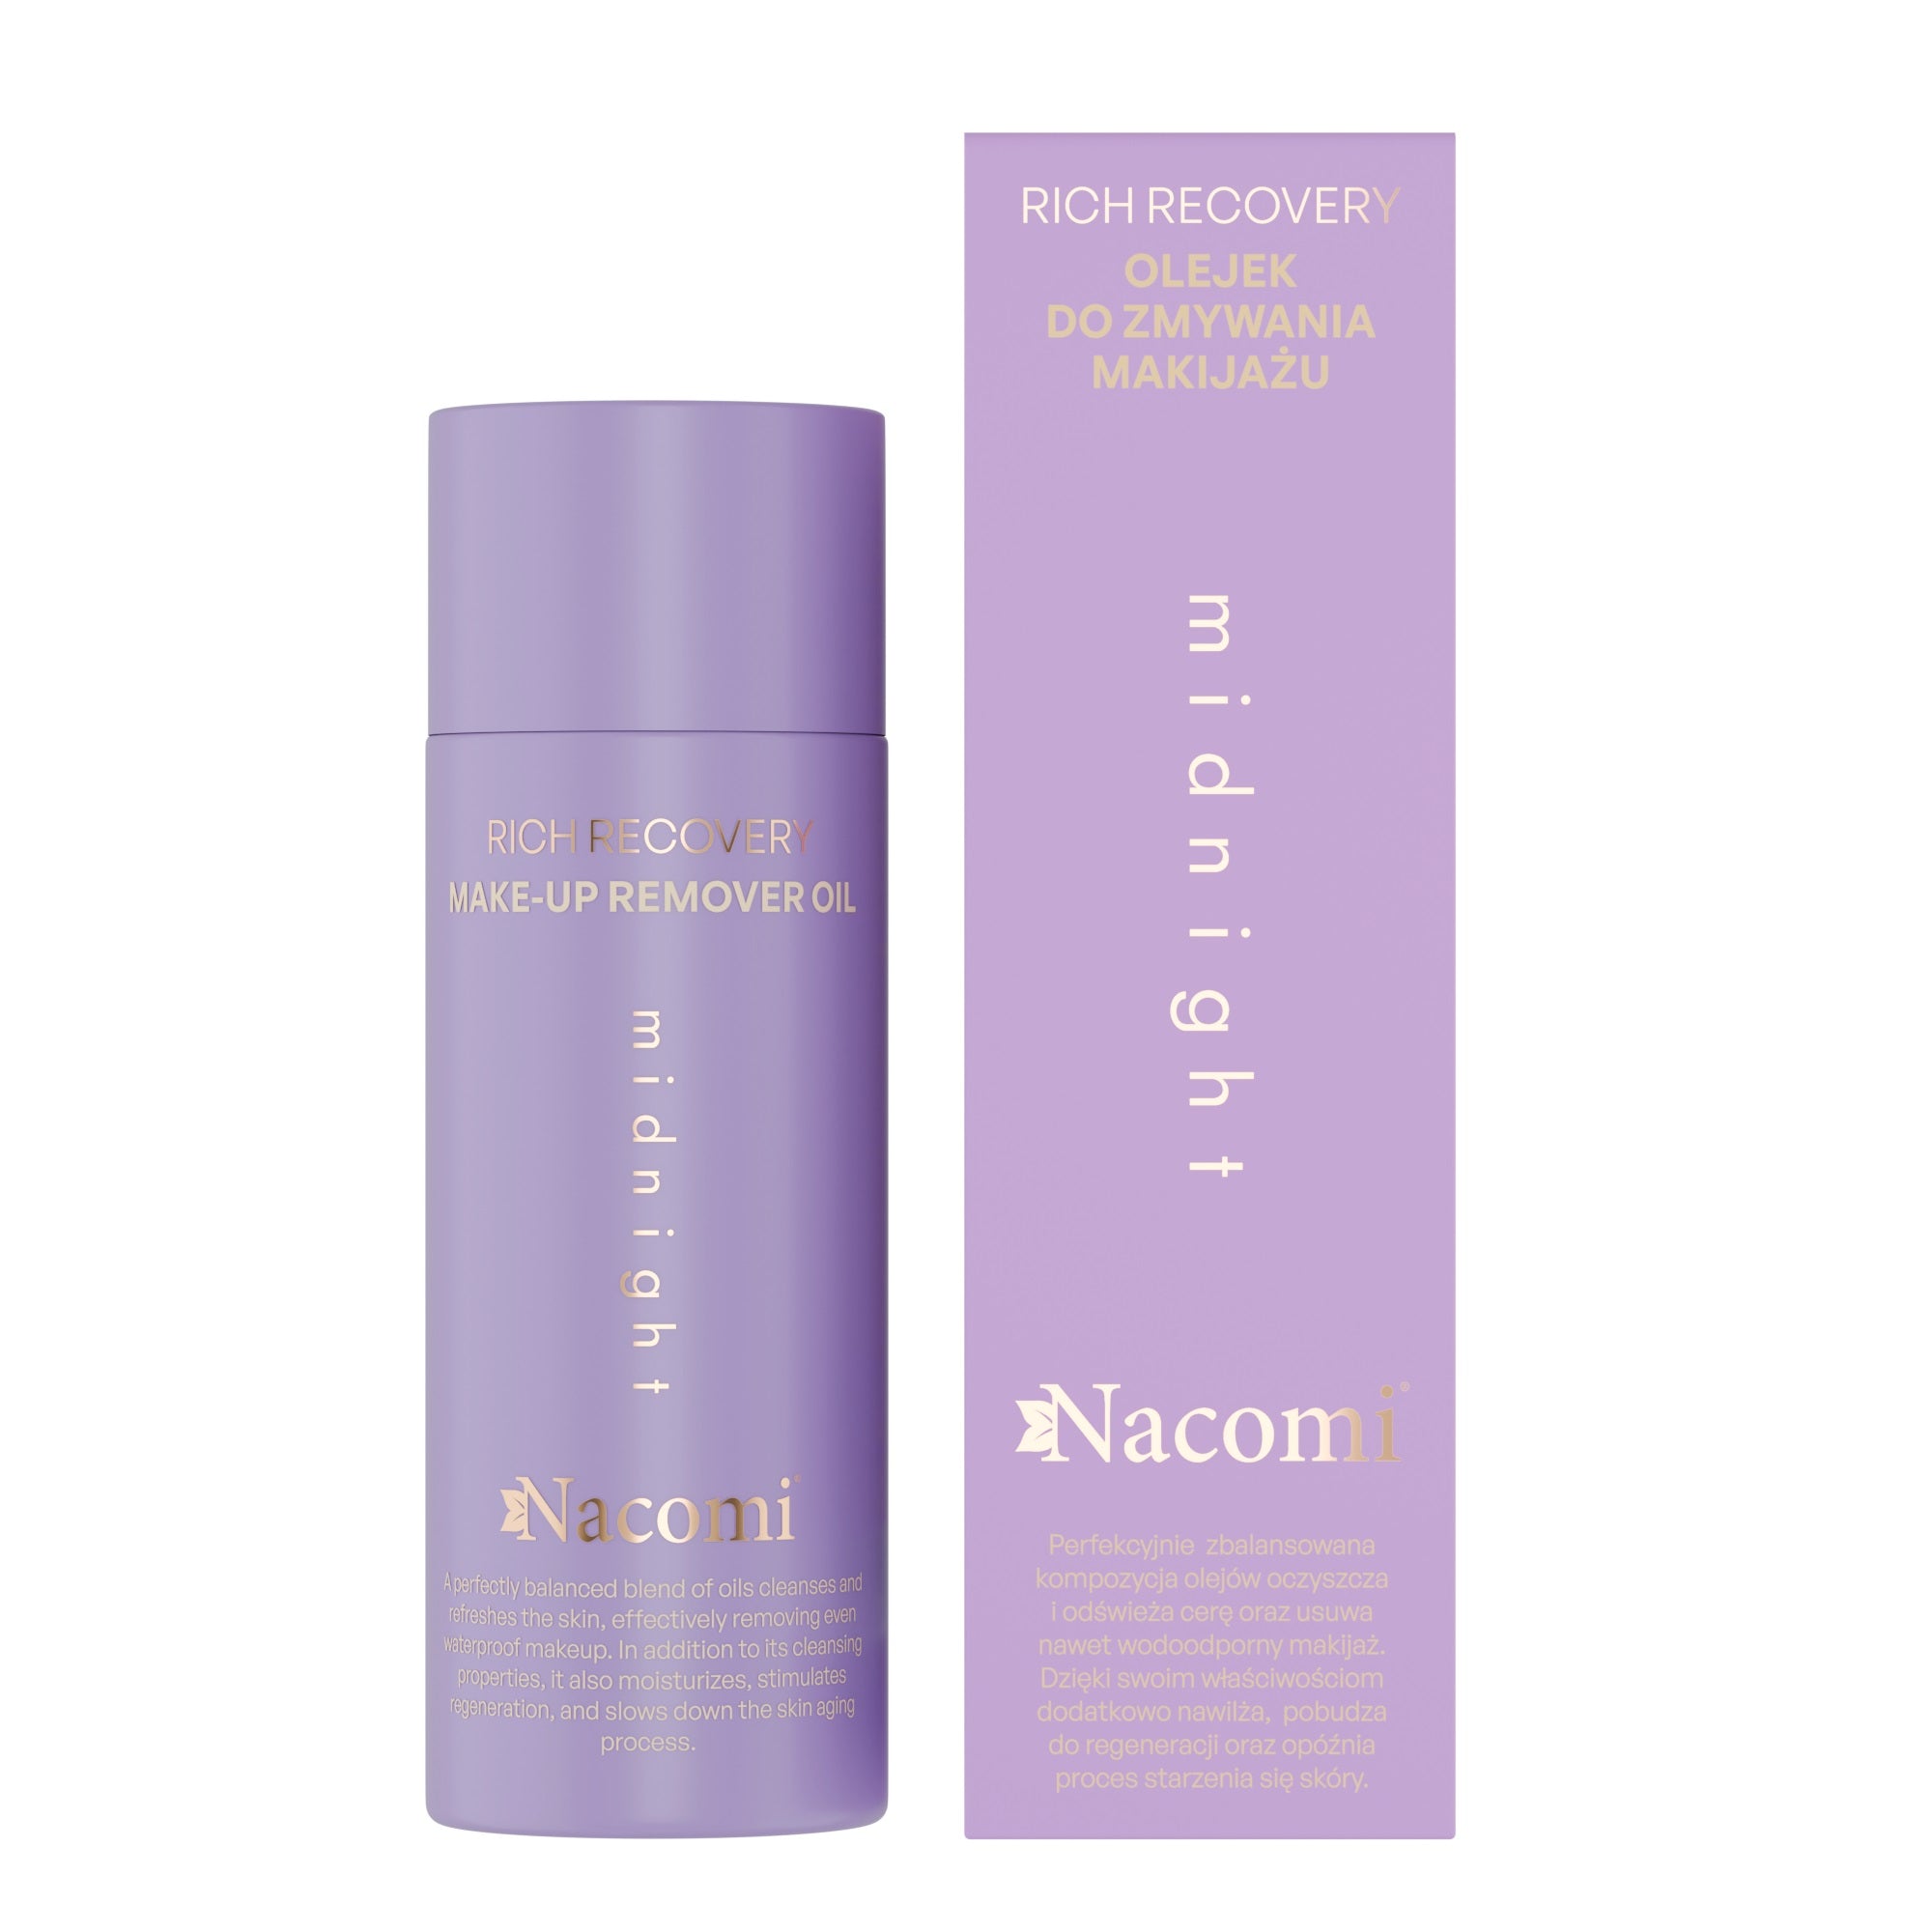 Nacomi Rich recovery Makeup Removing Oil MIDNIGHT 100ml